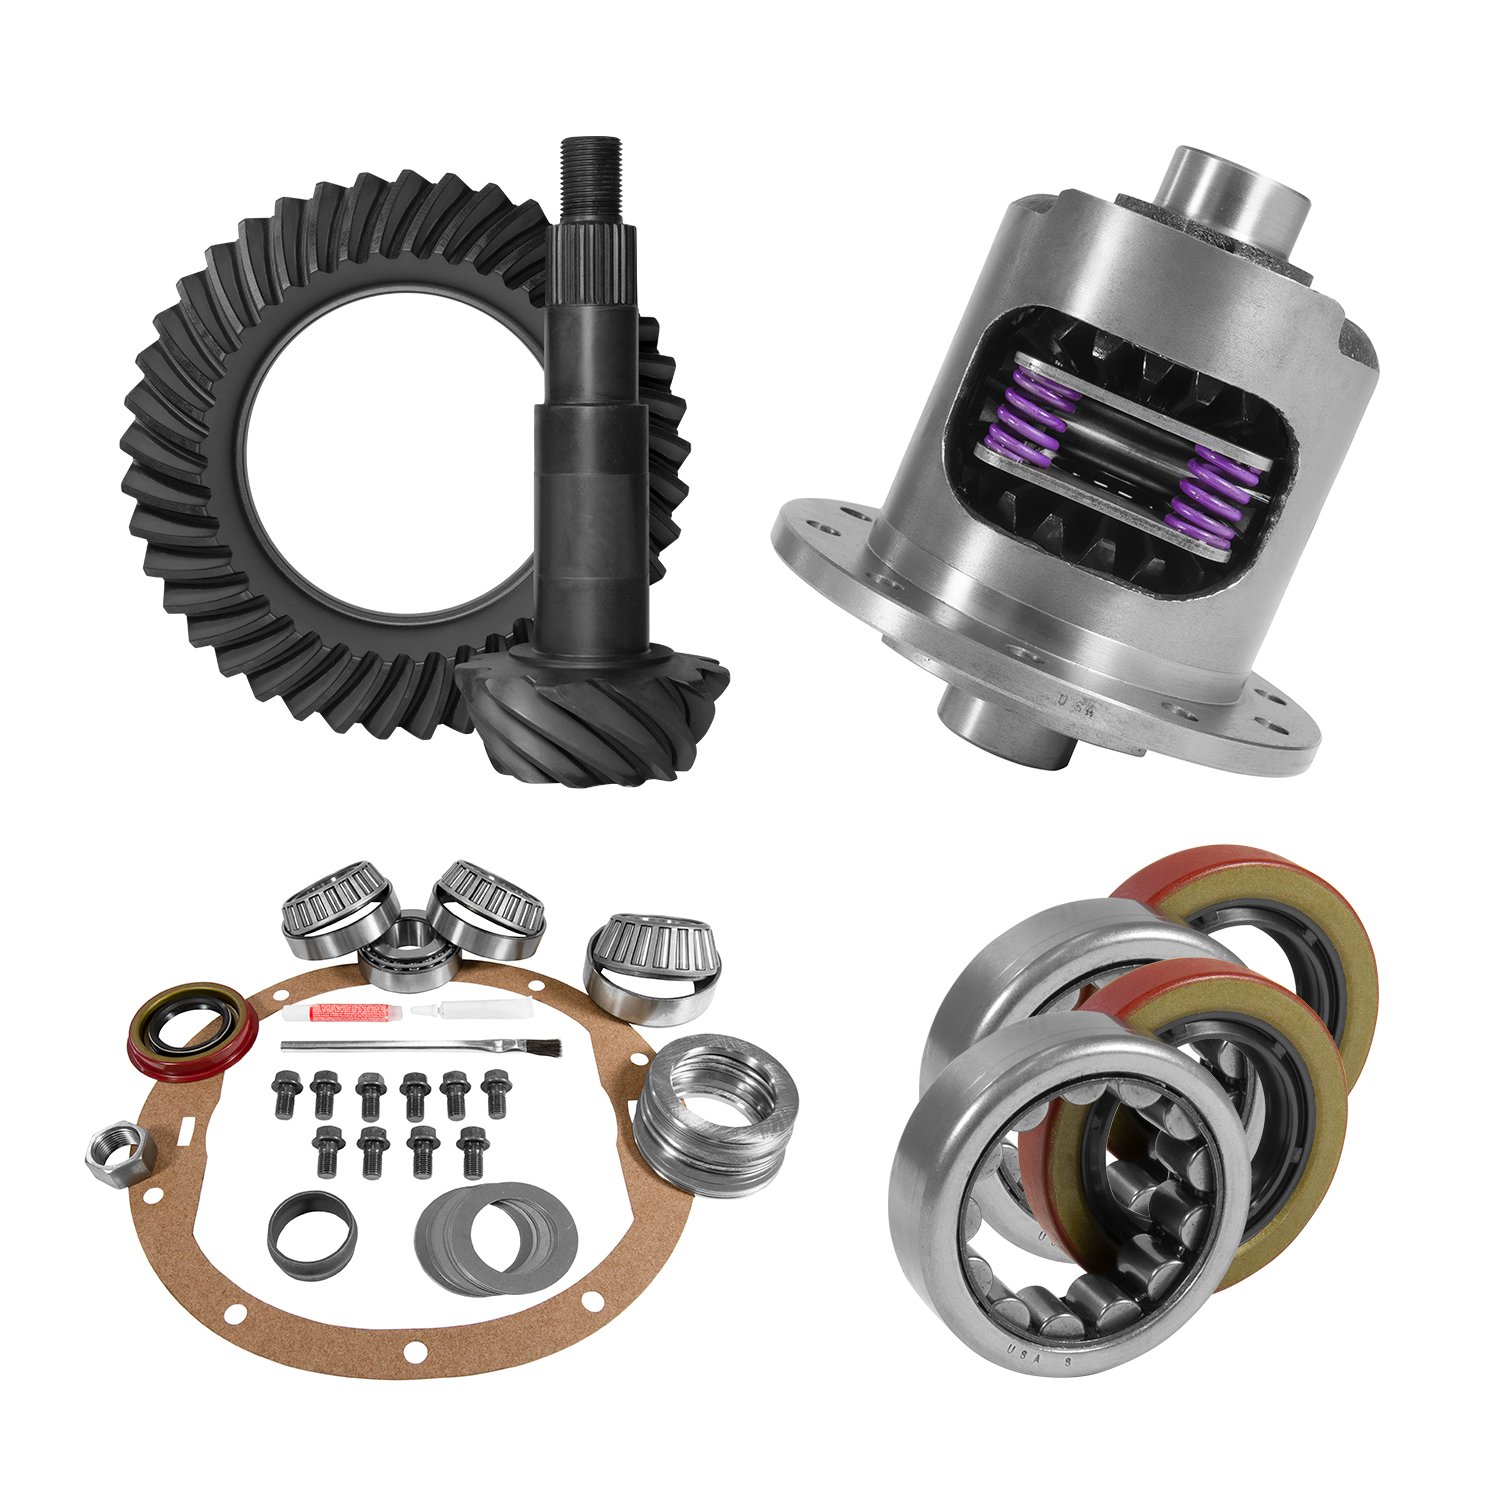 8.2 in. GM 3.55 Ratio Rear Ring & Pinion Gear Set and Master Install Kit Package